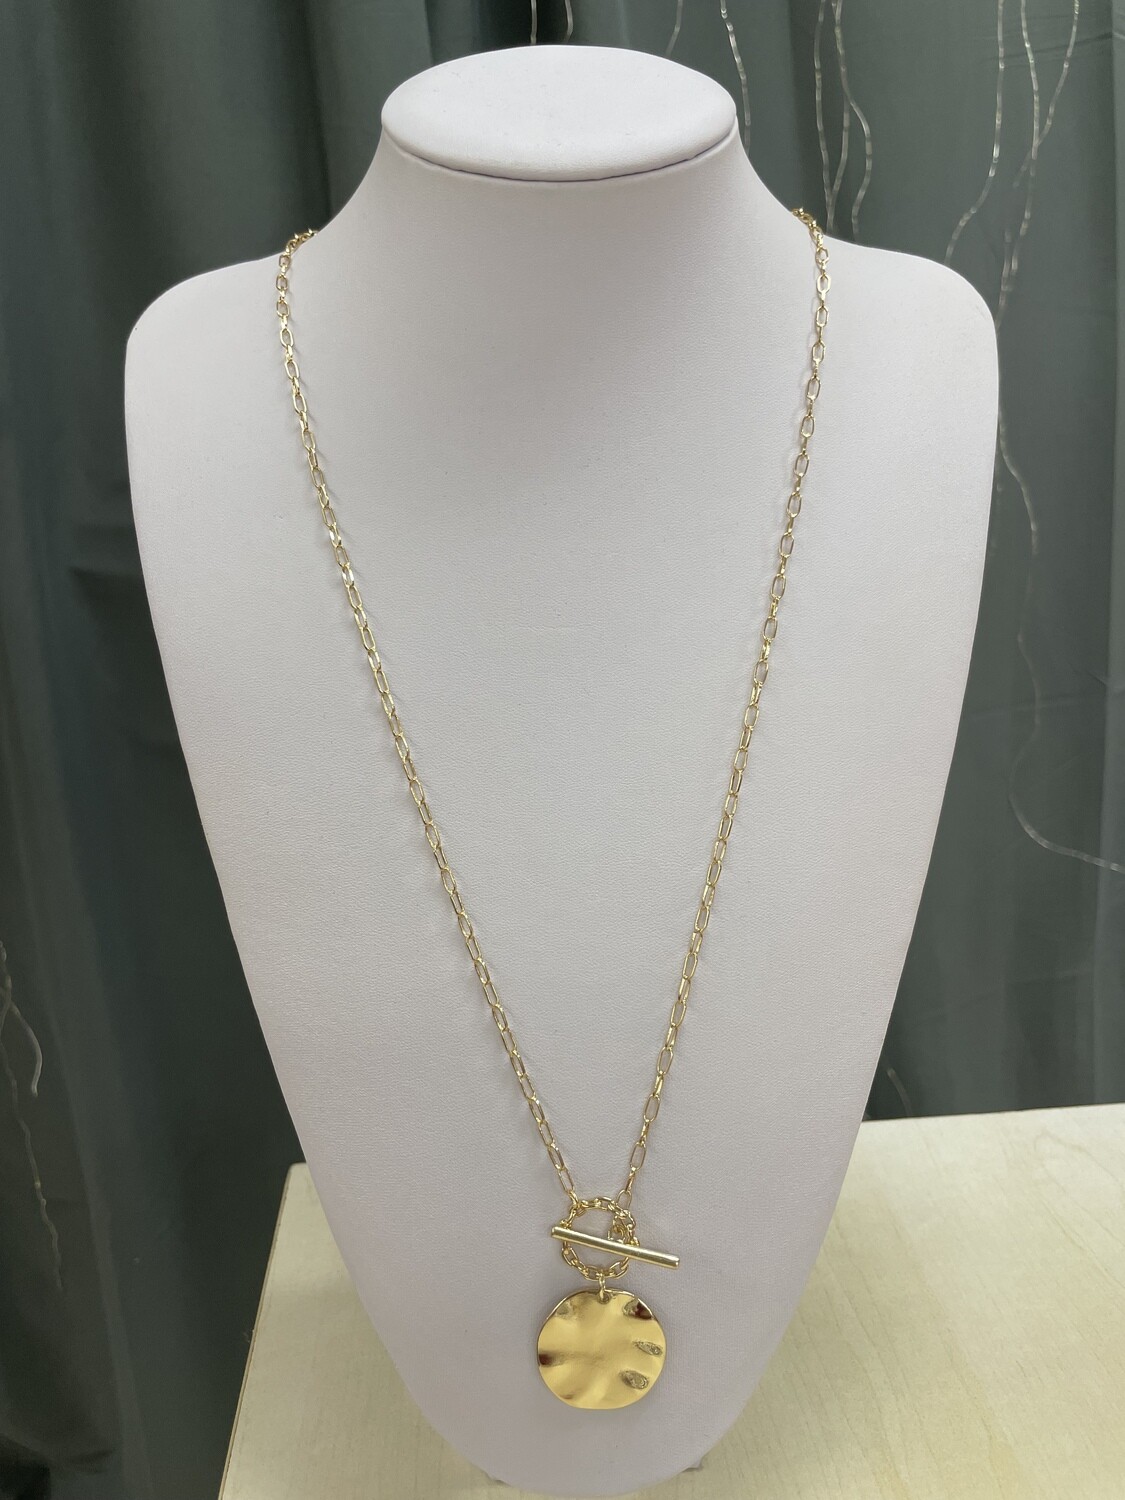 Long Gold Chain Toggle Necklace with Circle